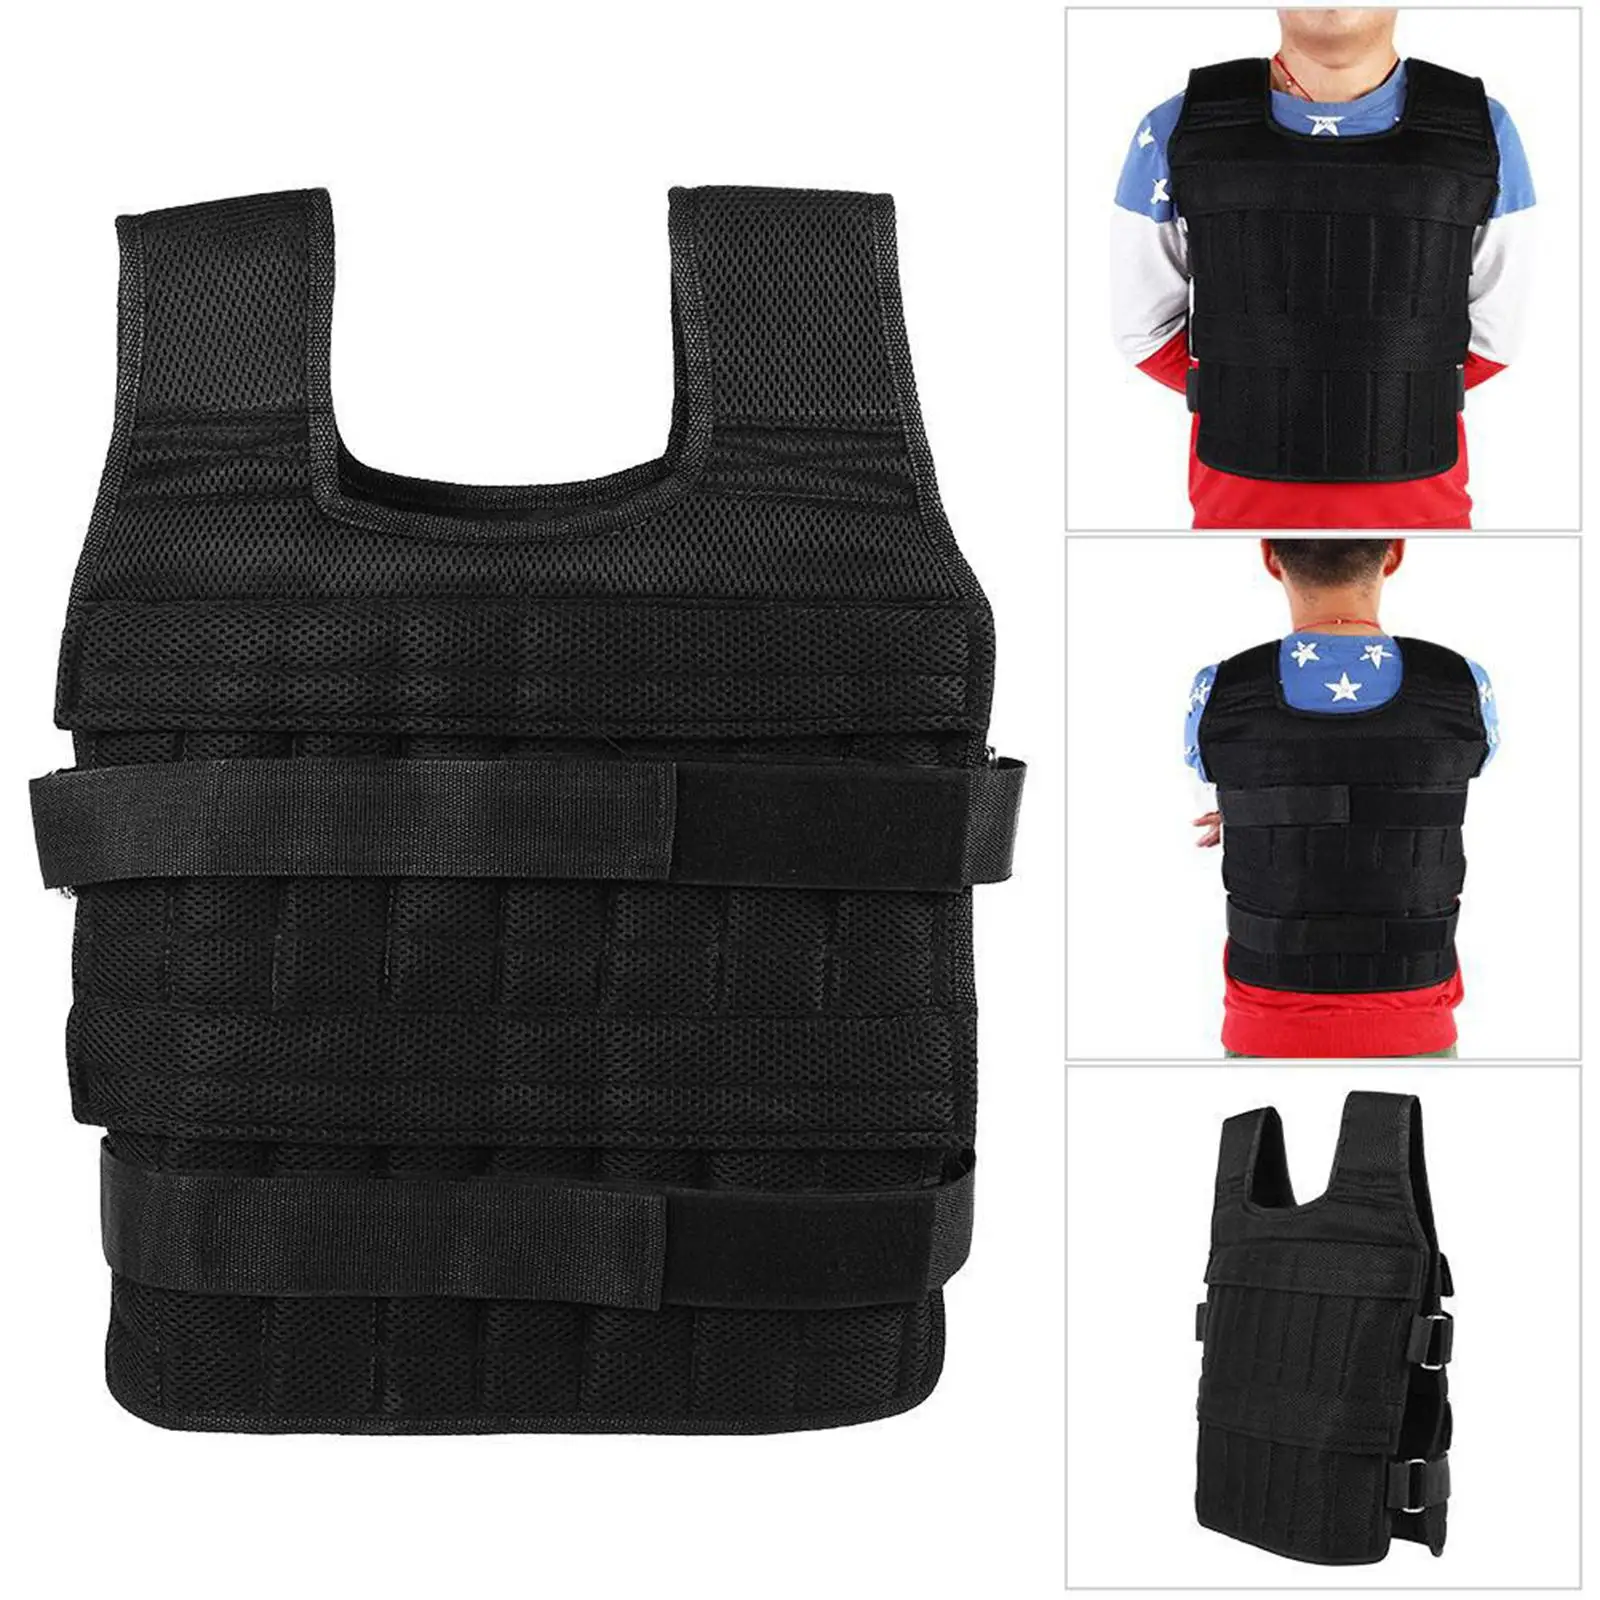 Professional Strength Training Weight Vests Soft Neoprene Durable Breathable weight vest for Exercise home,training Equipment